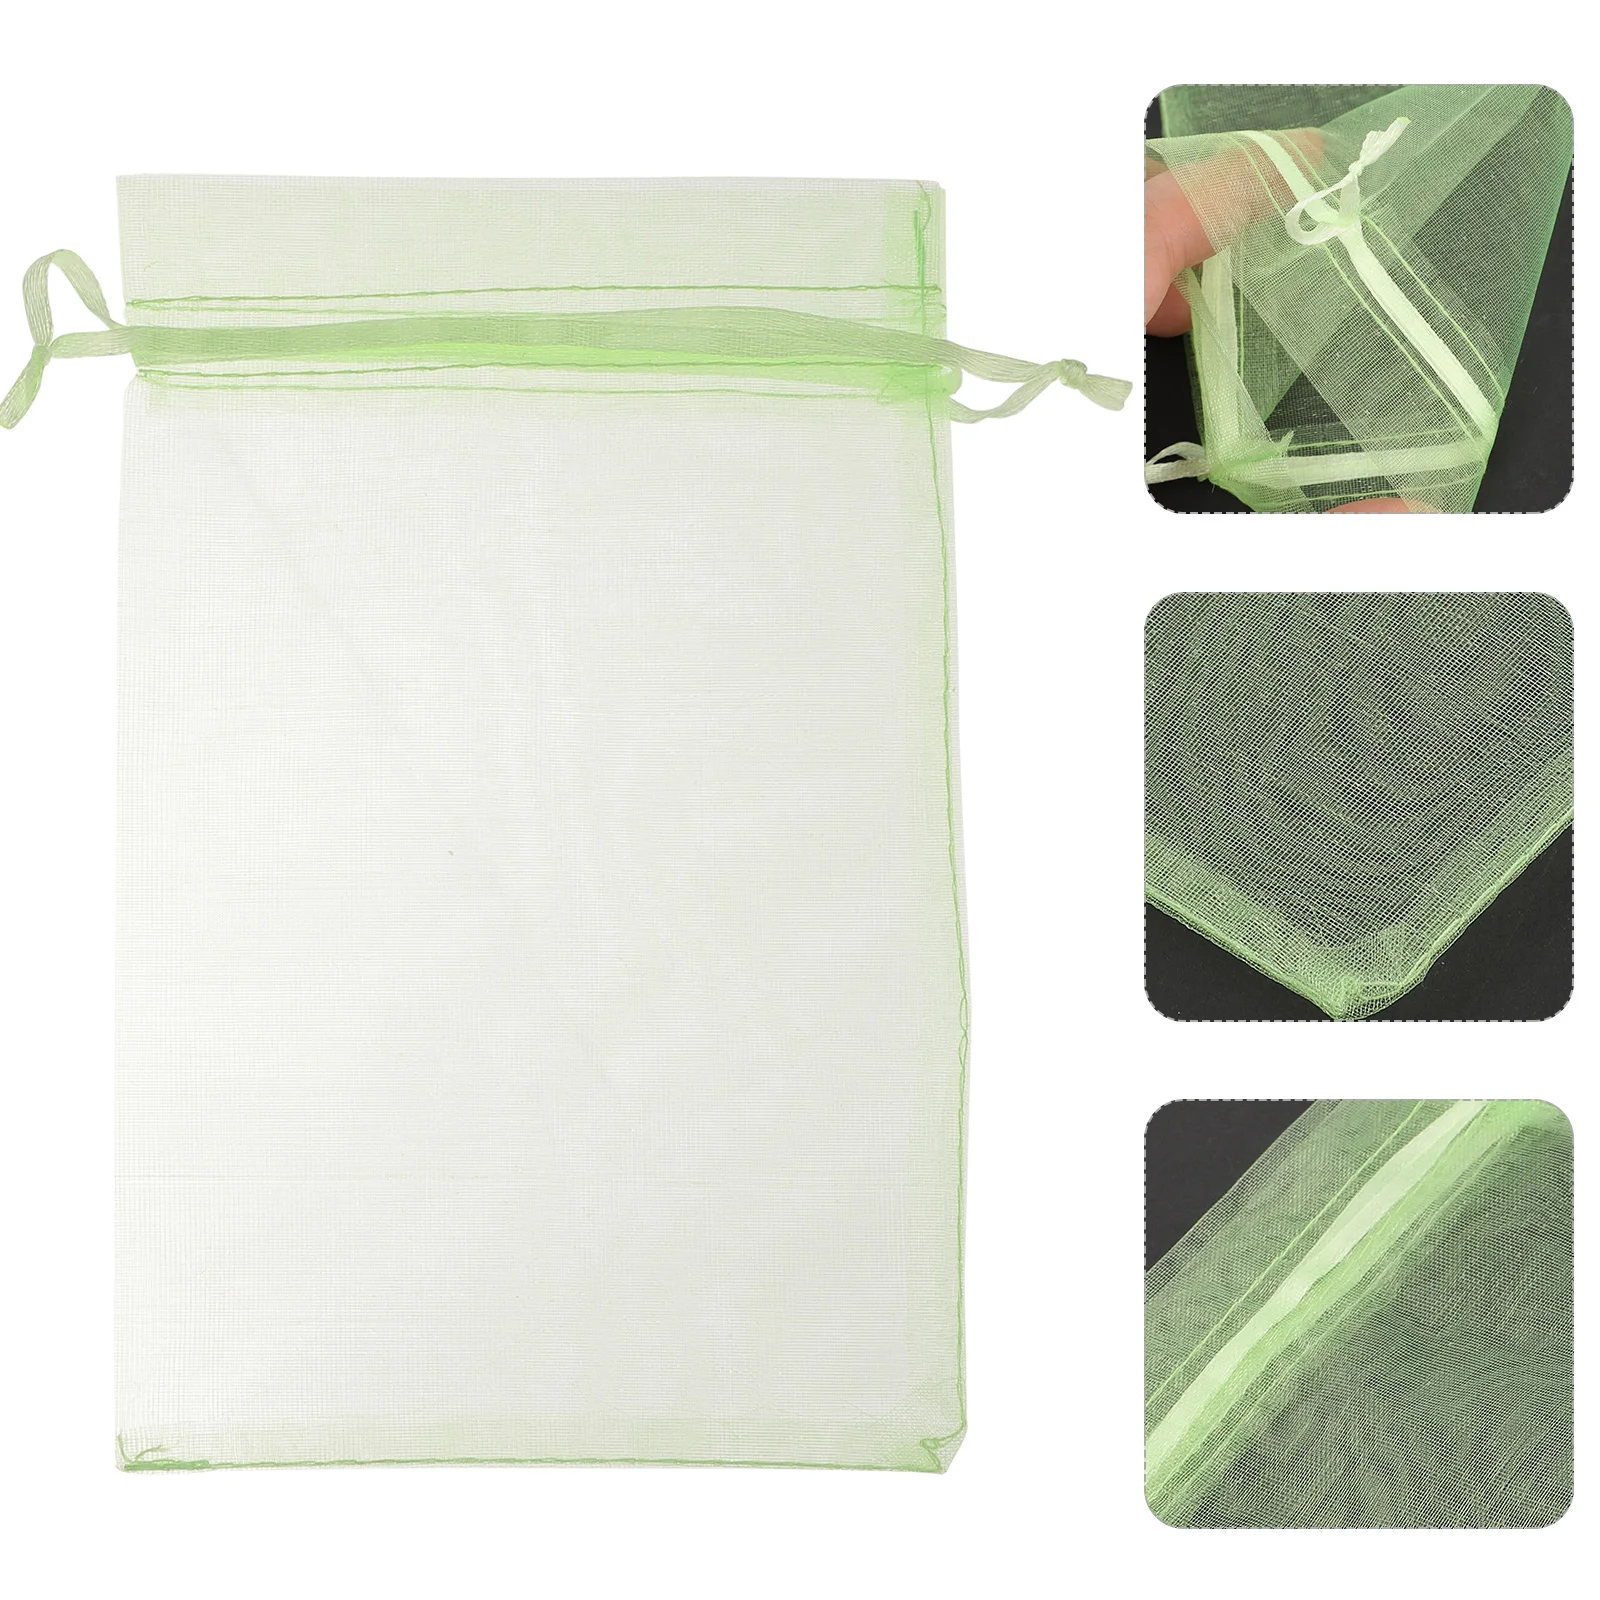 

100 Pcs Fruit Protection Mesh Bag Tomato Grow Bags Anti-bird Anti-insect Organza Bitter Gourd Prevent Barrier Tomatoes